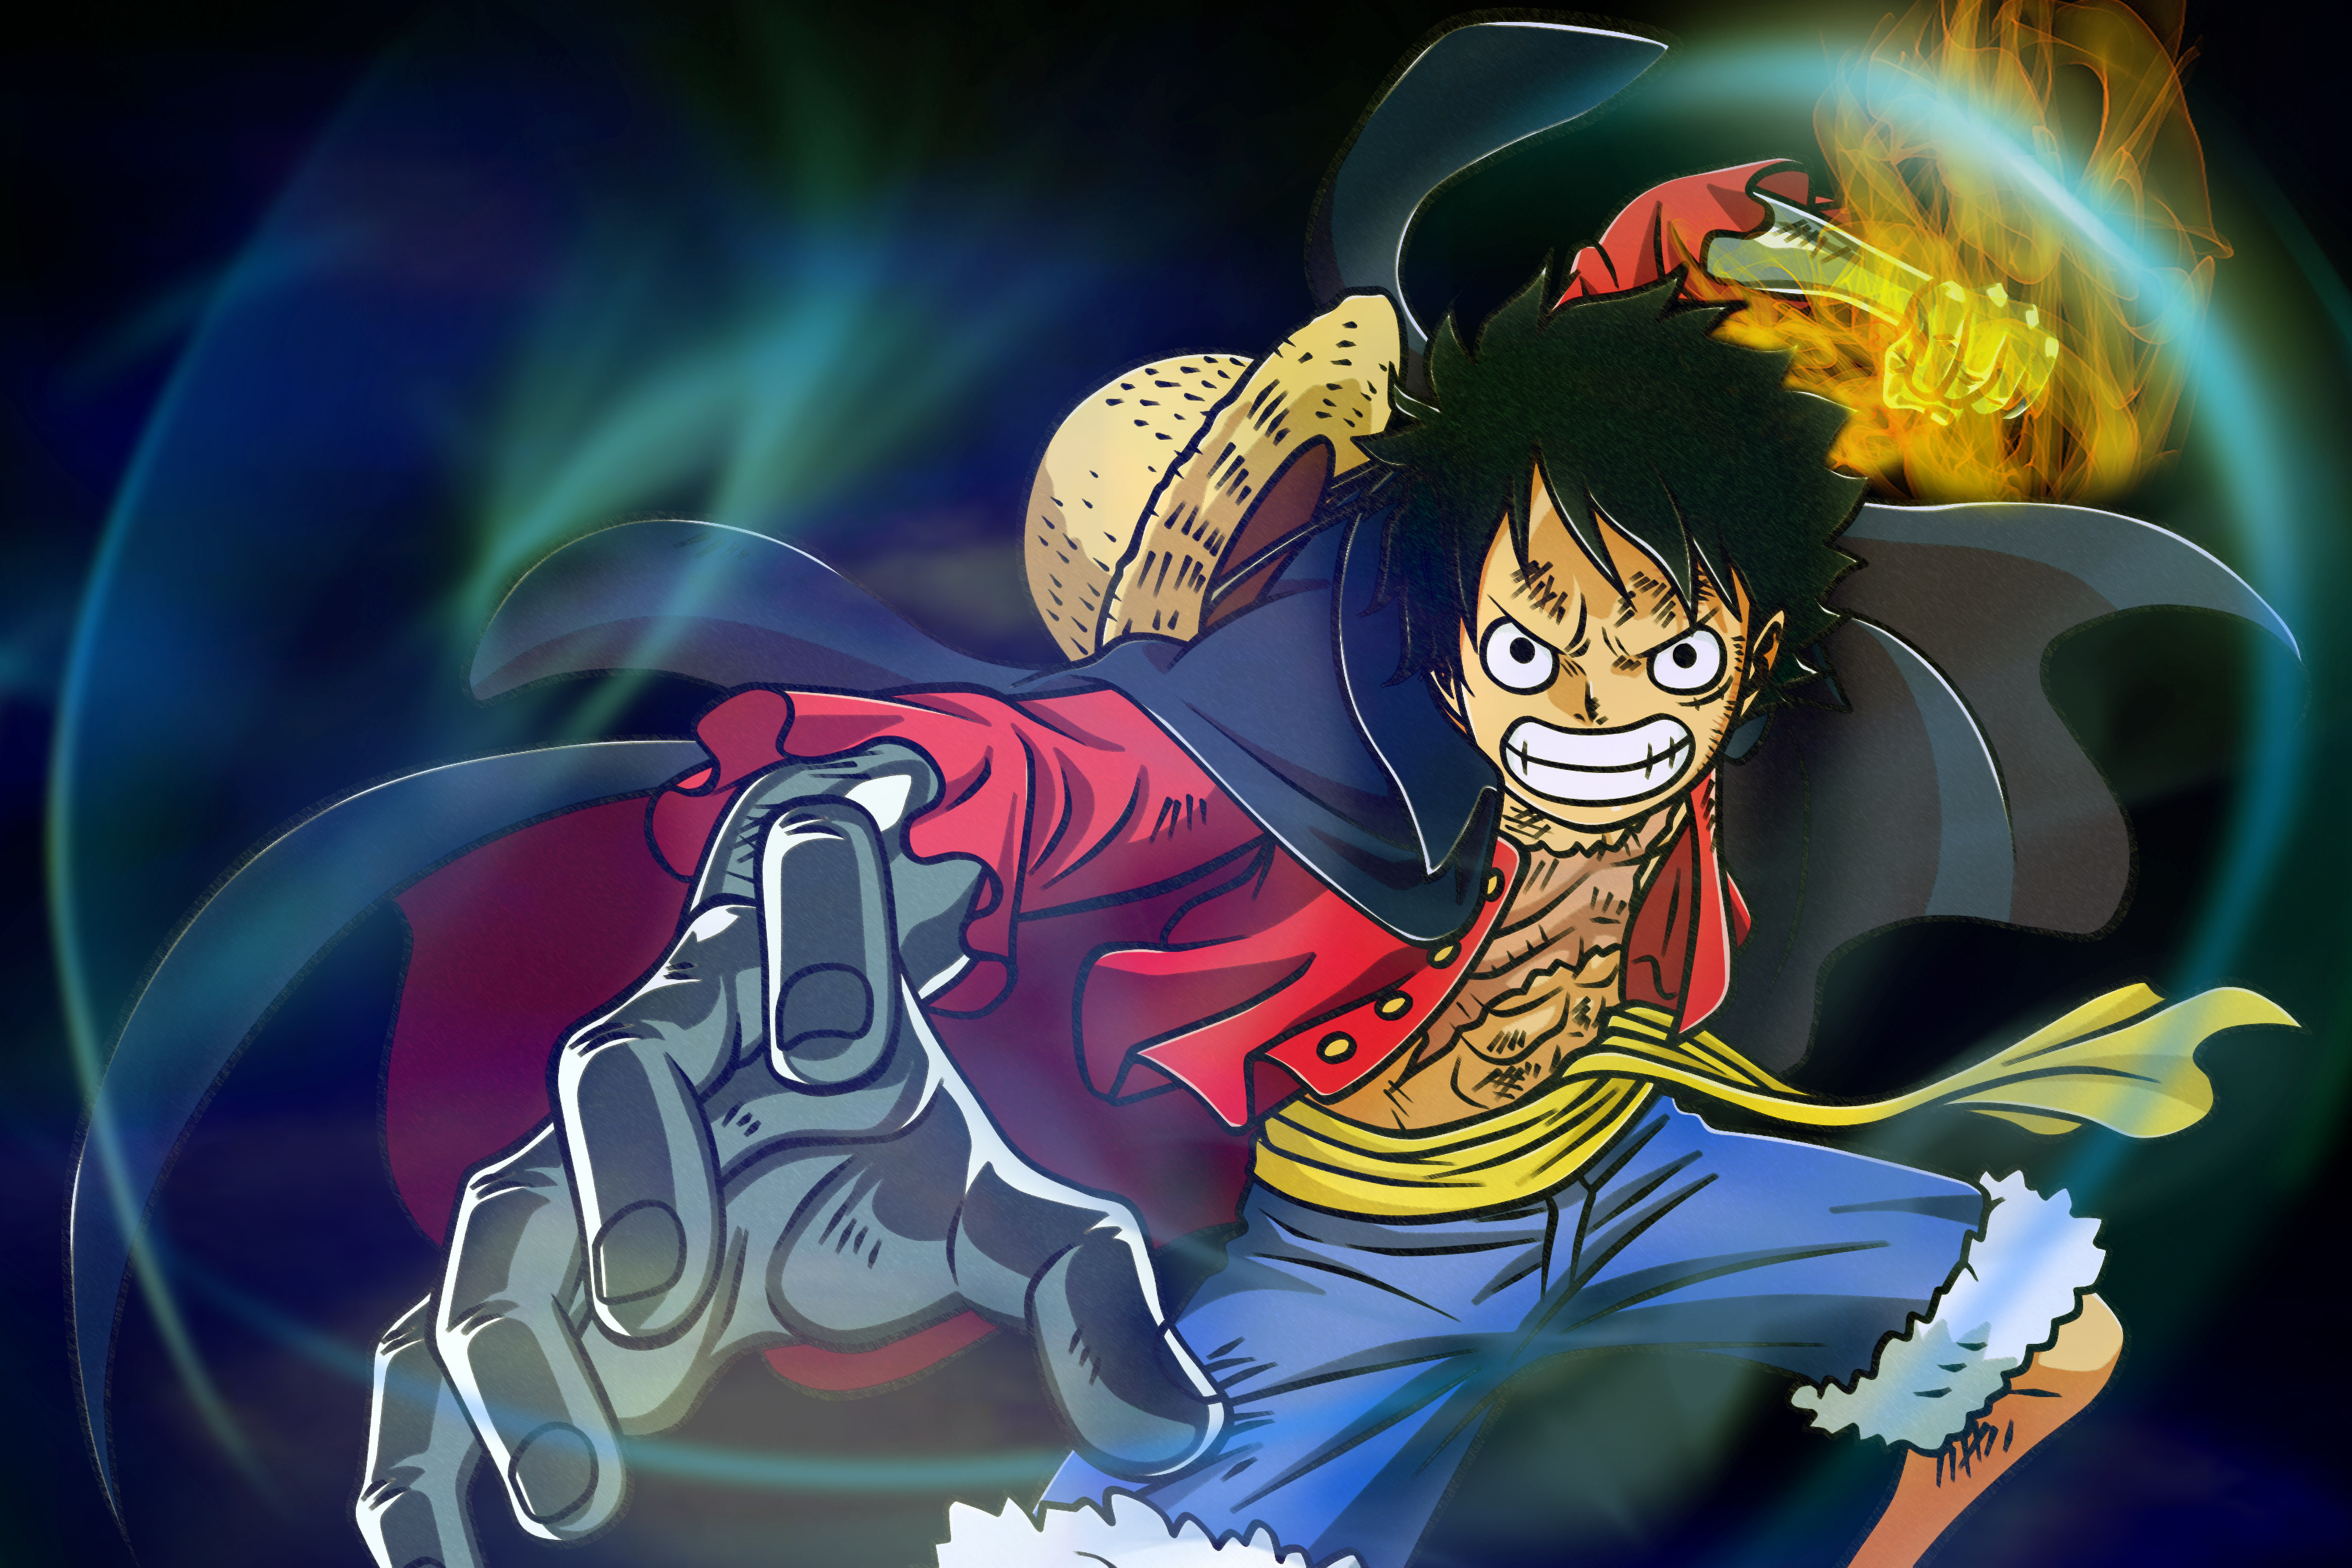 ONE PIECE LUFFY WALLPAPER 4K FOR PC